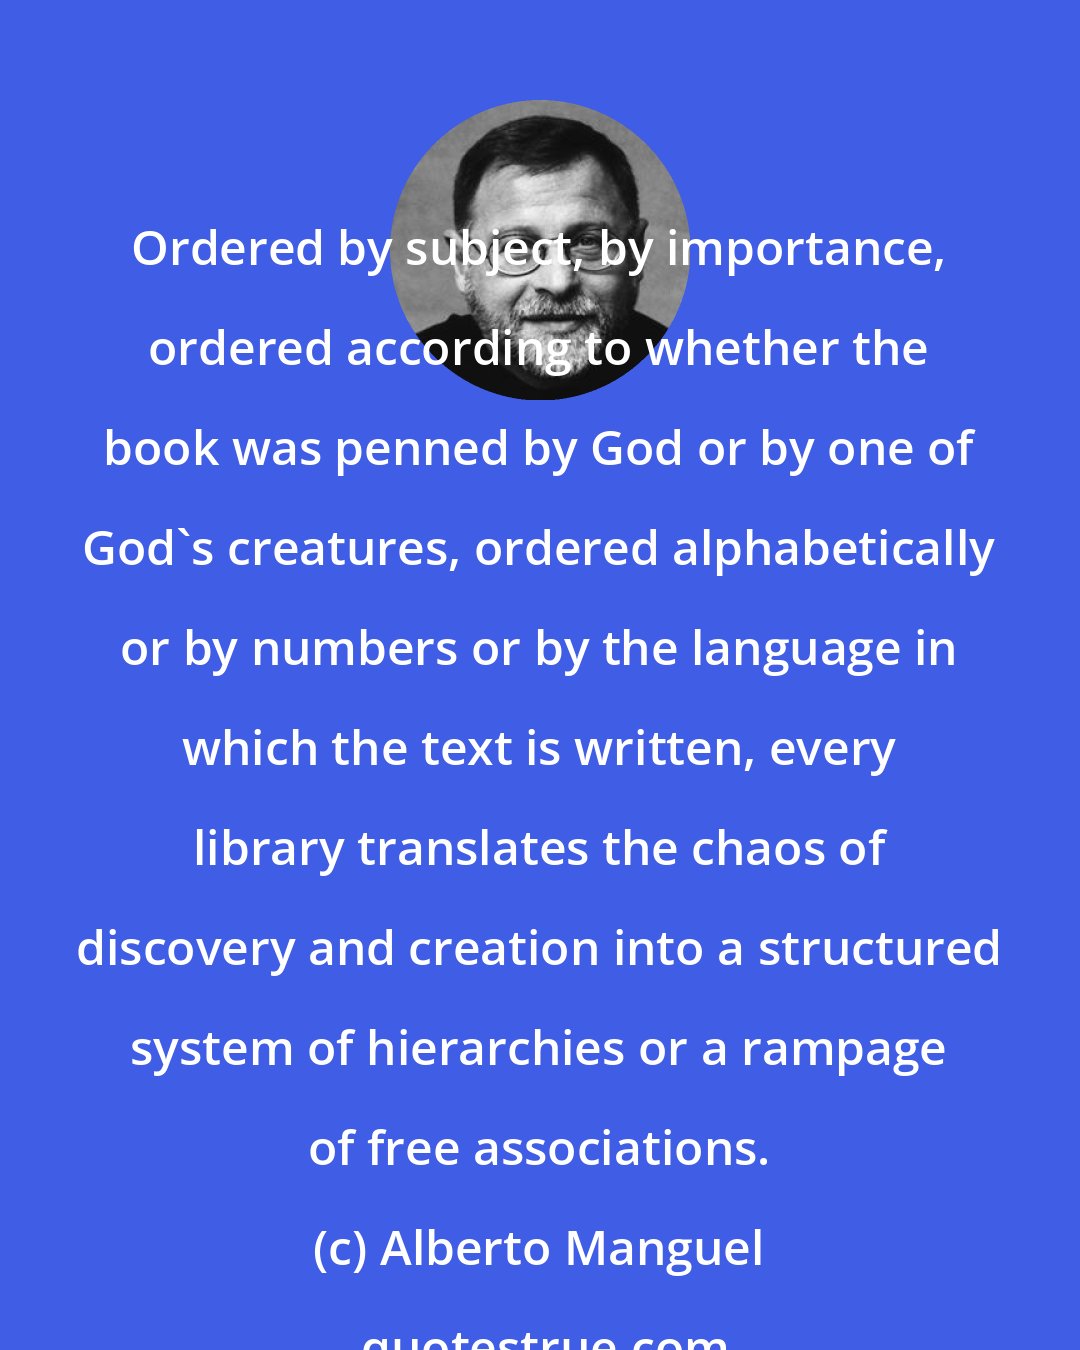 Alberto Manguel: Ordered by subject, by importance, ordered according to whether the book was penned by God or by one of God's creatures, ordered alphabetically or by numbers or by the language in which the text is written, every library translates the chaos of discovery and creation into a structured system of hierarchies or a rampage of free associations.